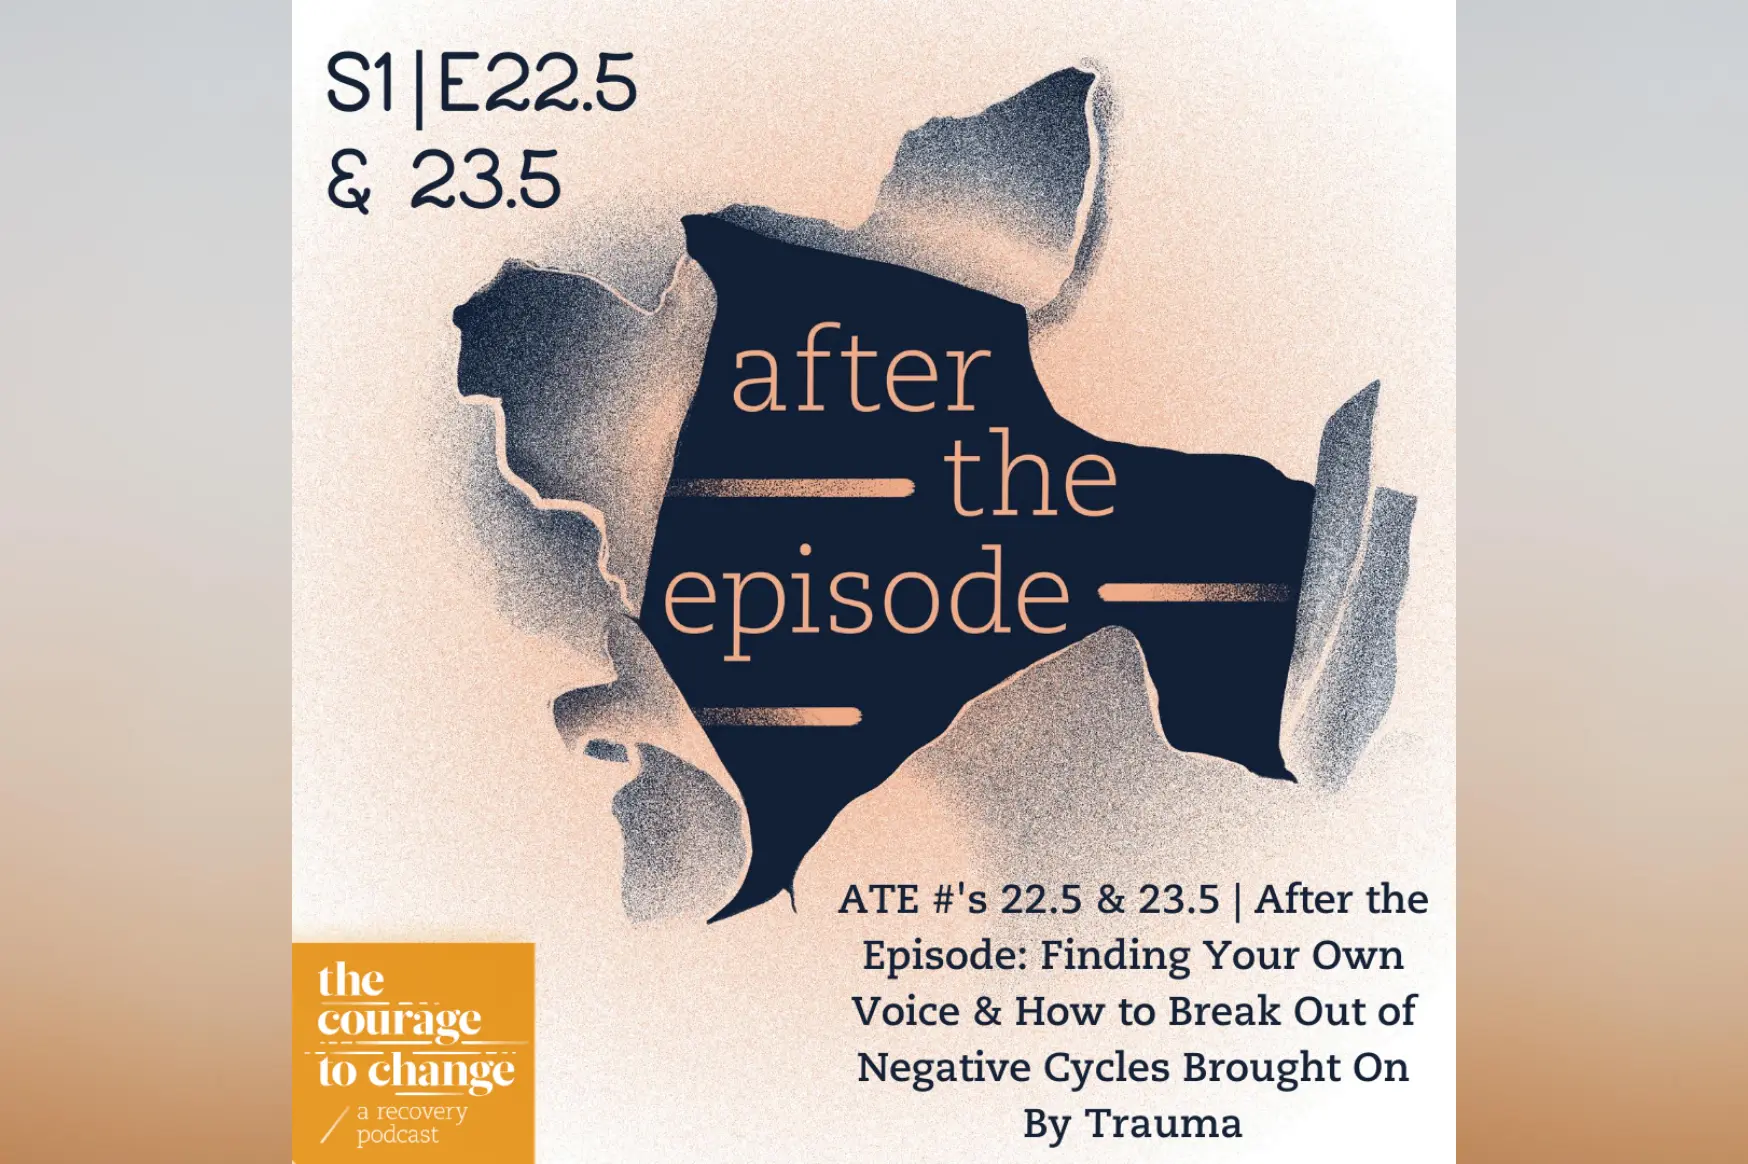 #22.5 & 23.5 - After the Episode